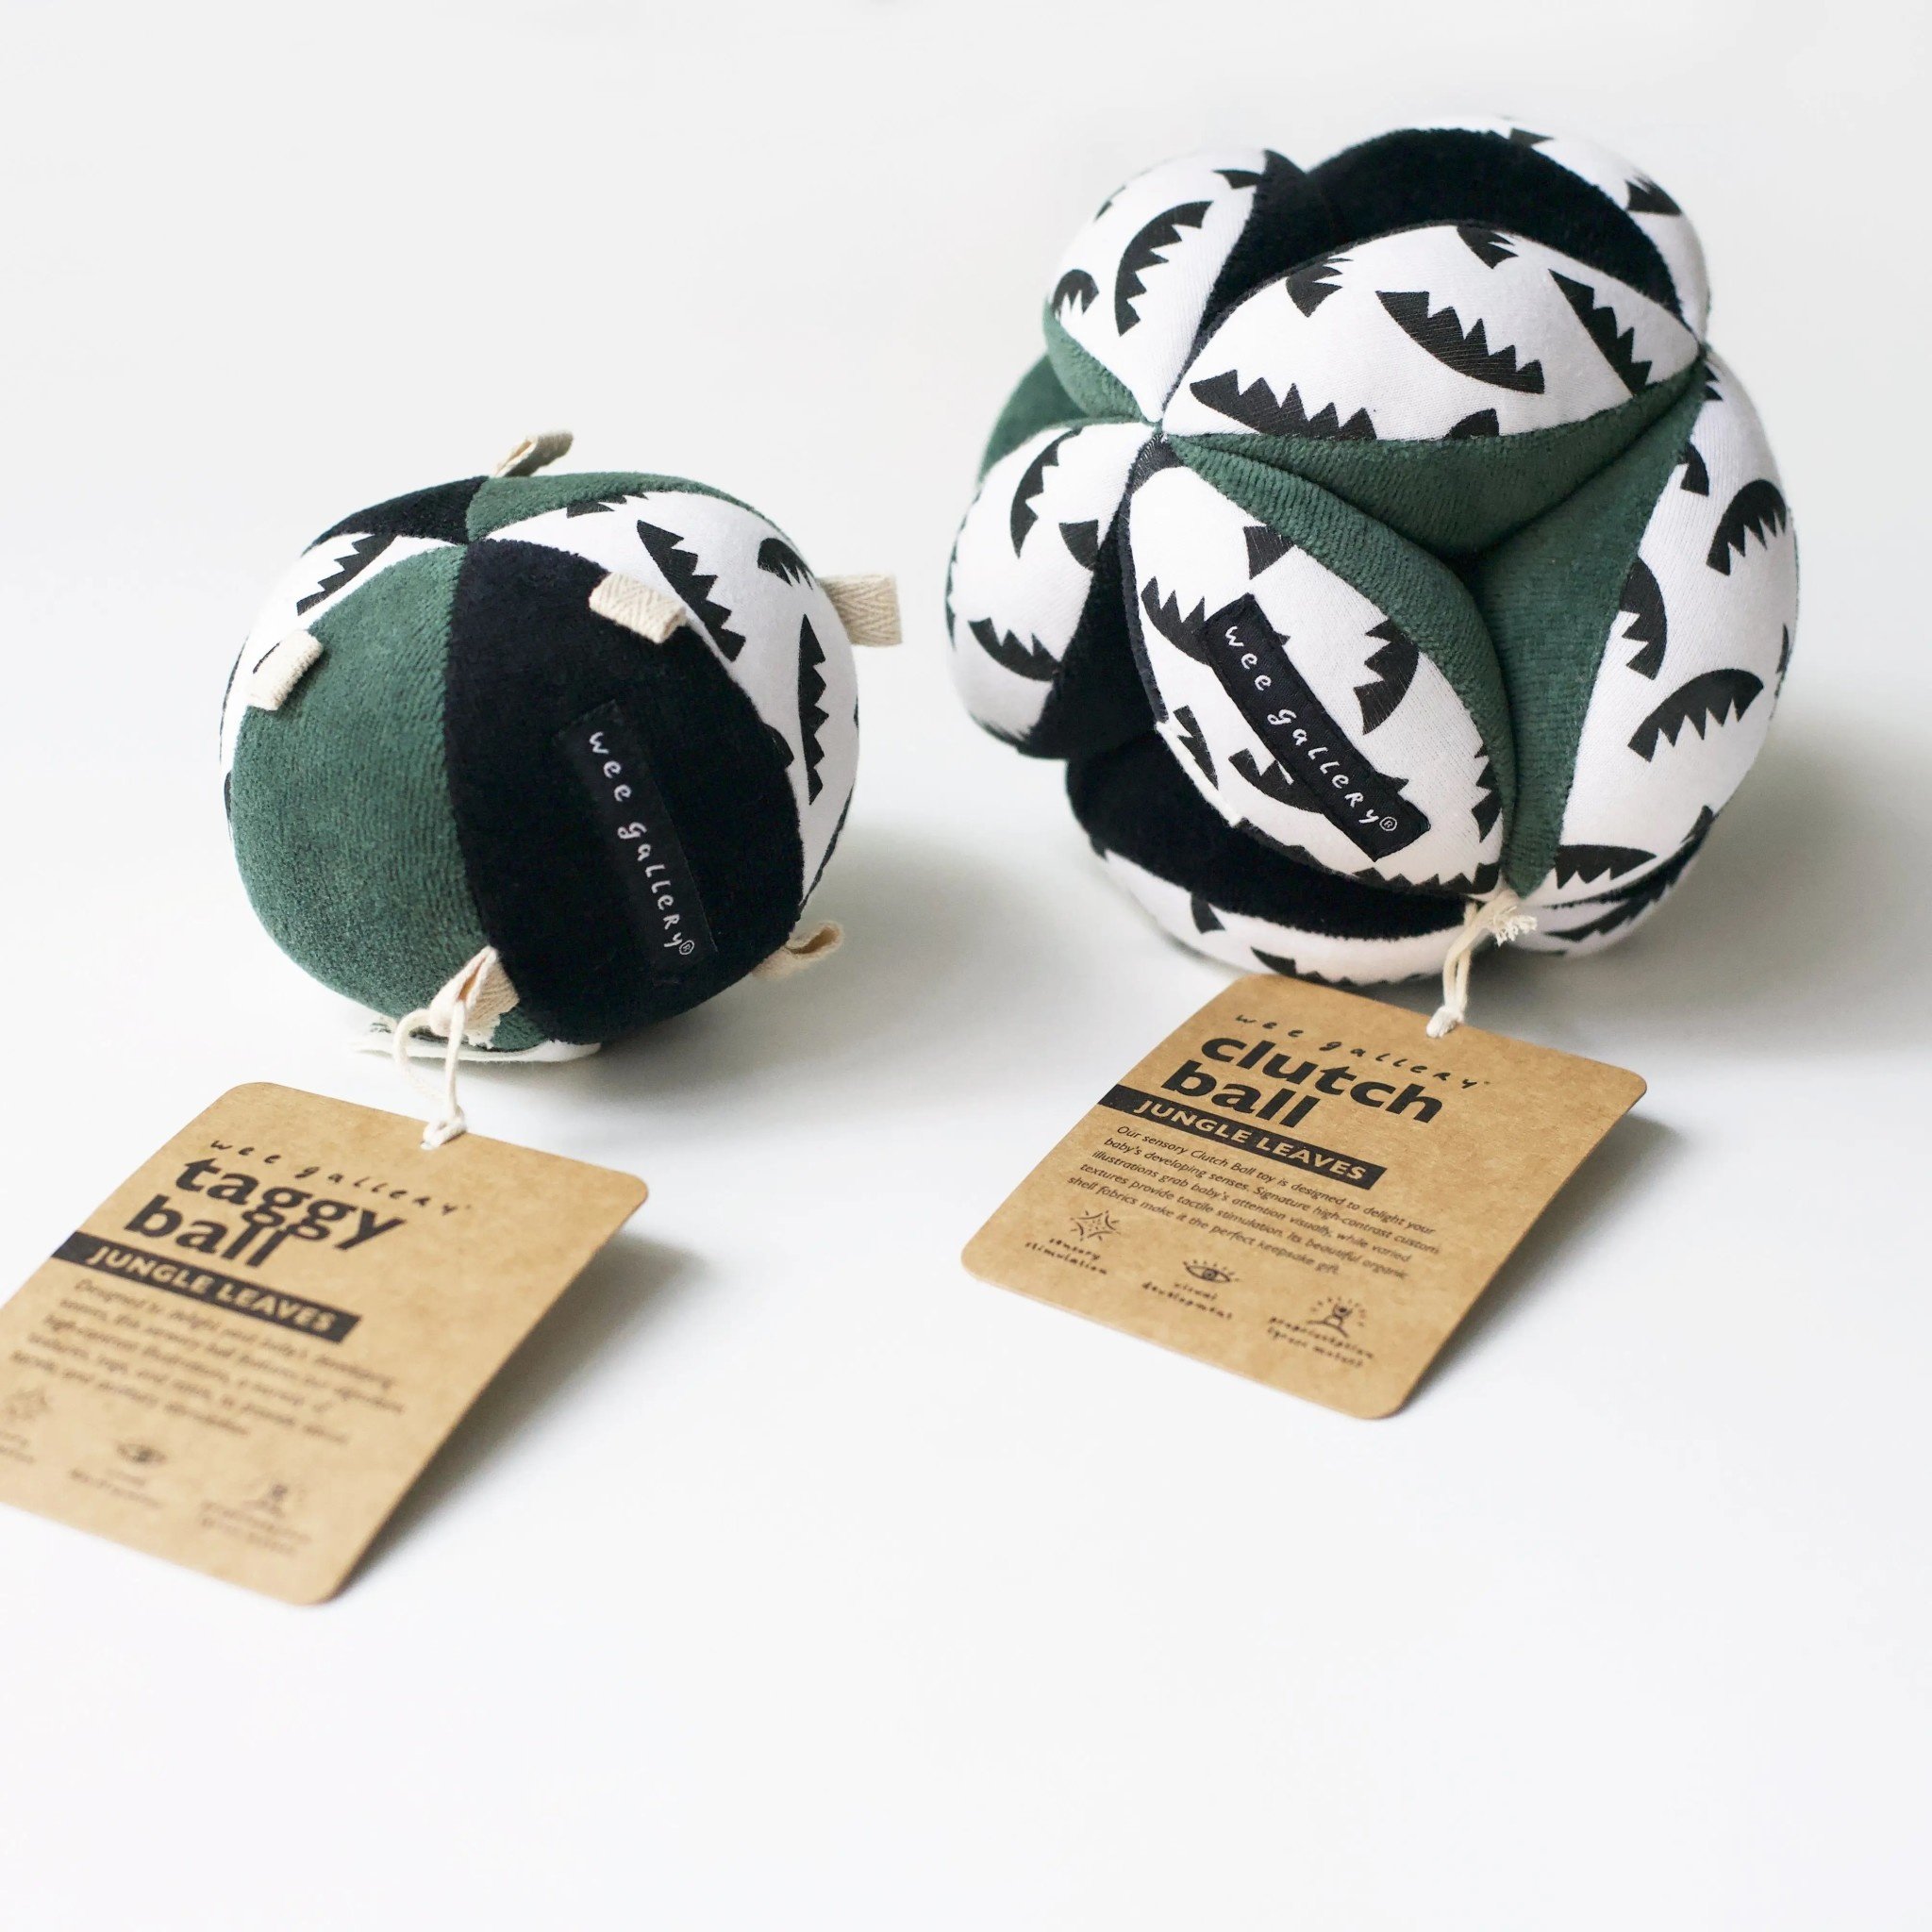 Wee Gallery Wee Gallery - Organic Taggy Ball with Rattle